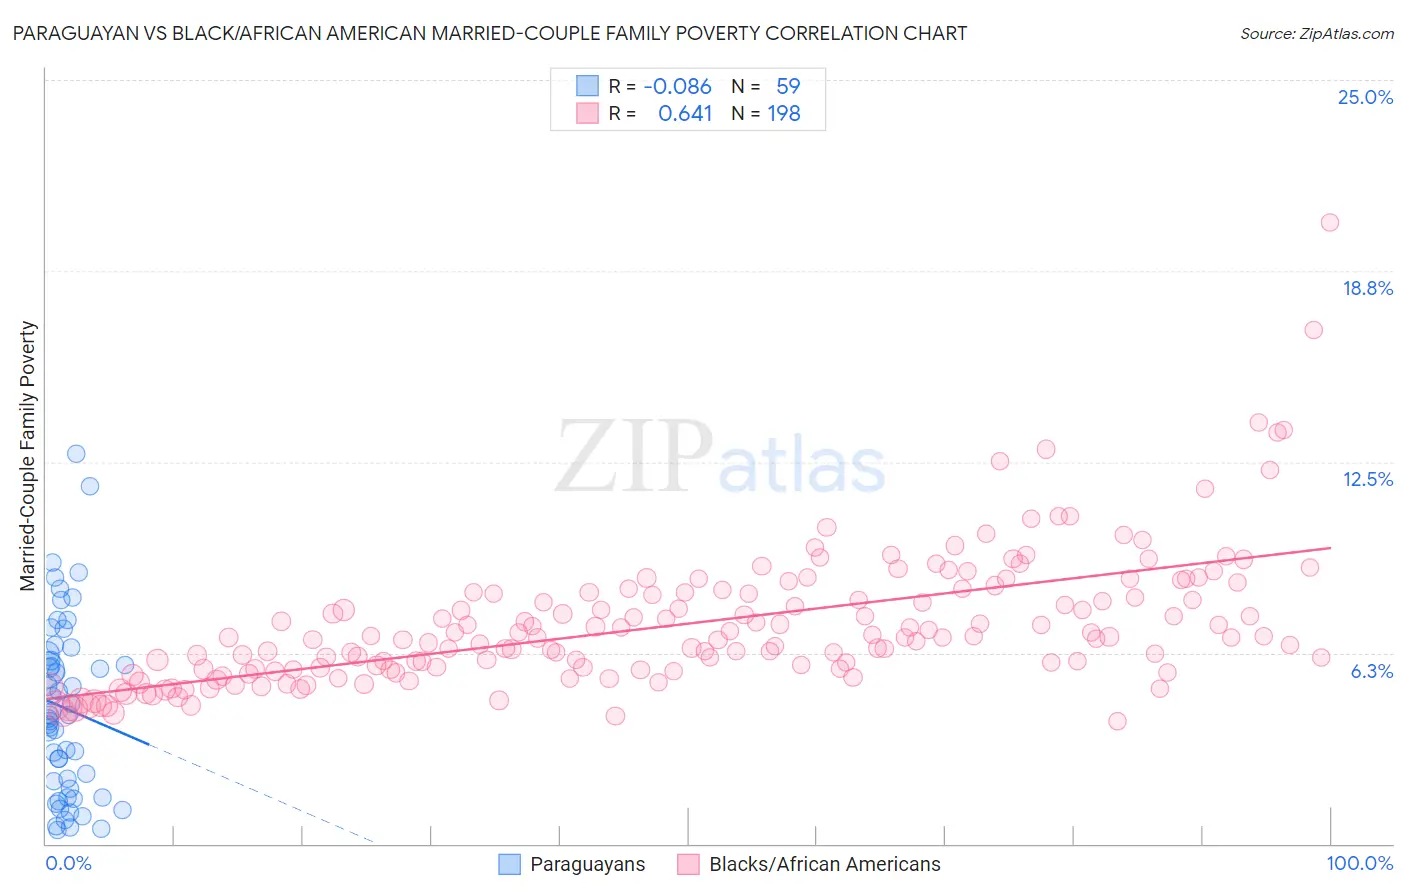 Paraguayan vs Black/African American Married-Couple Family Poverty